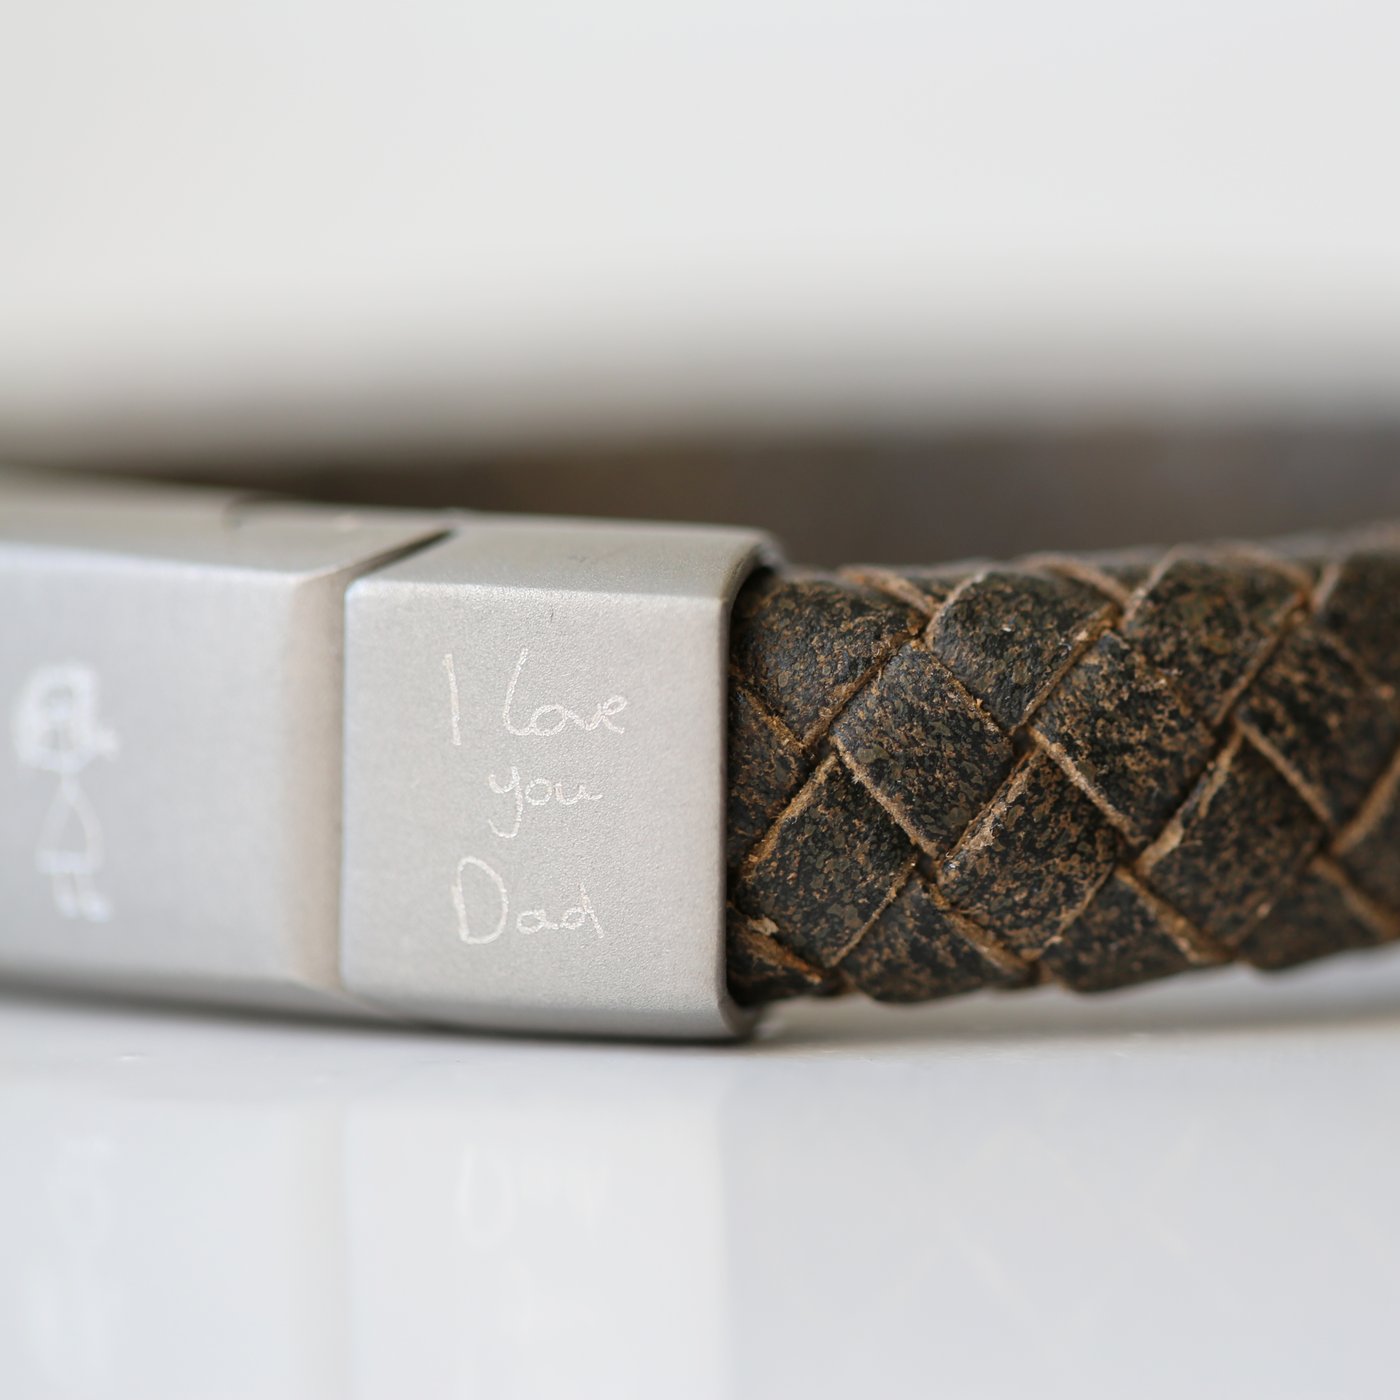 Own Handwriting Leather Engraved Antique Style Bracelet - Rustic - Shop Personalised Gifts